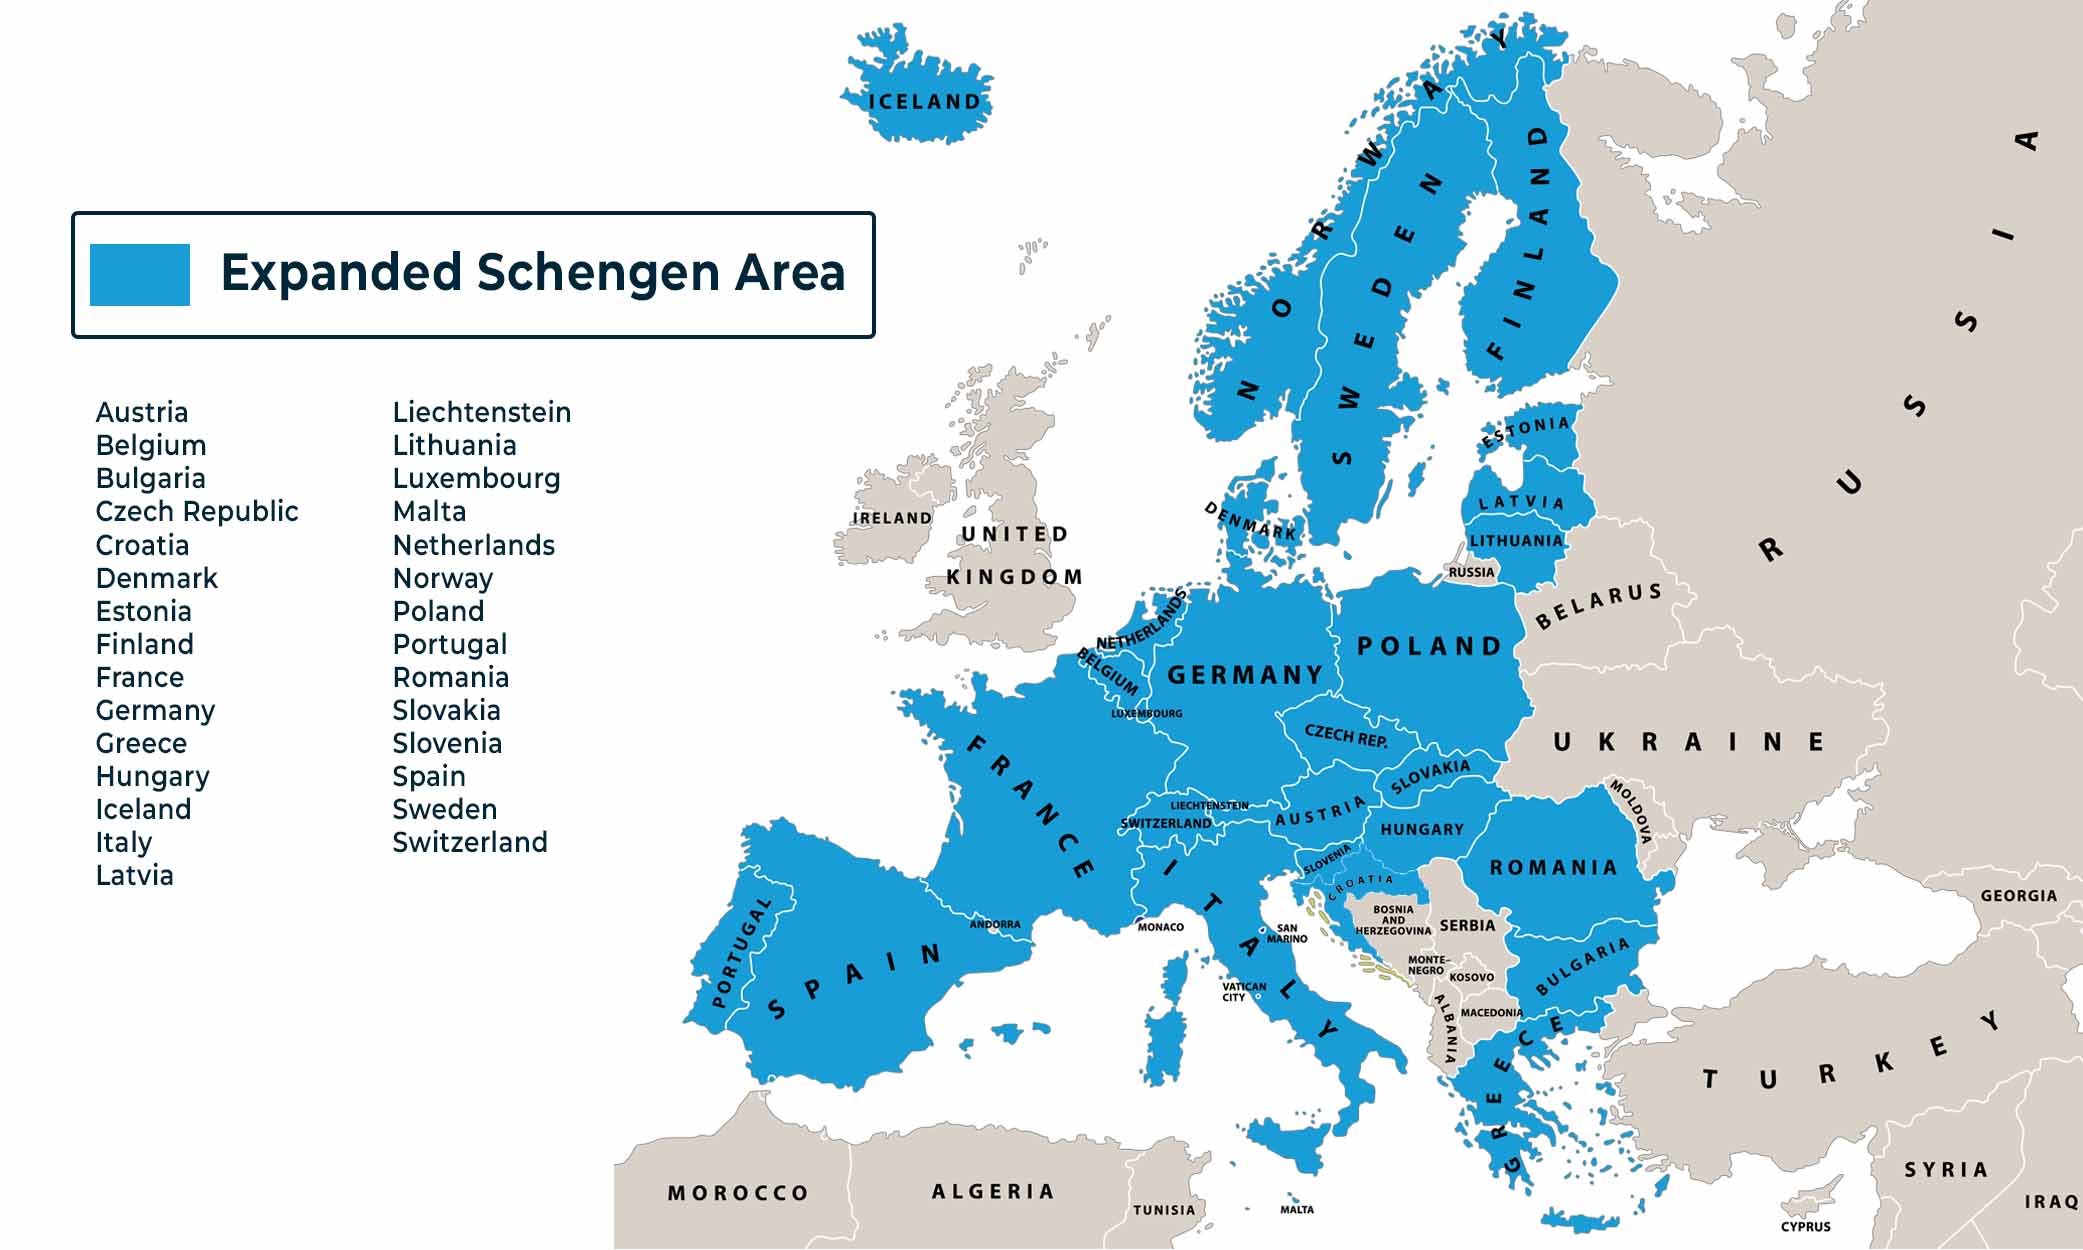 Find out about Bulgaria and Romania joining the Schengen Zone.